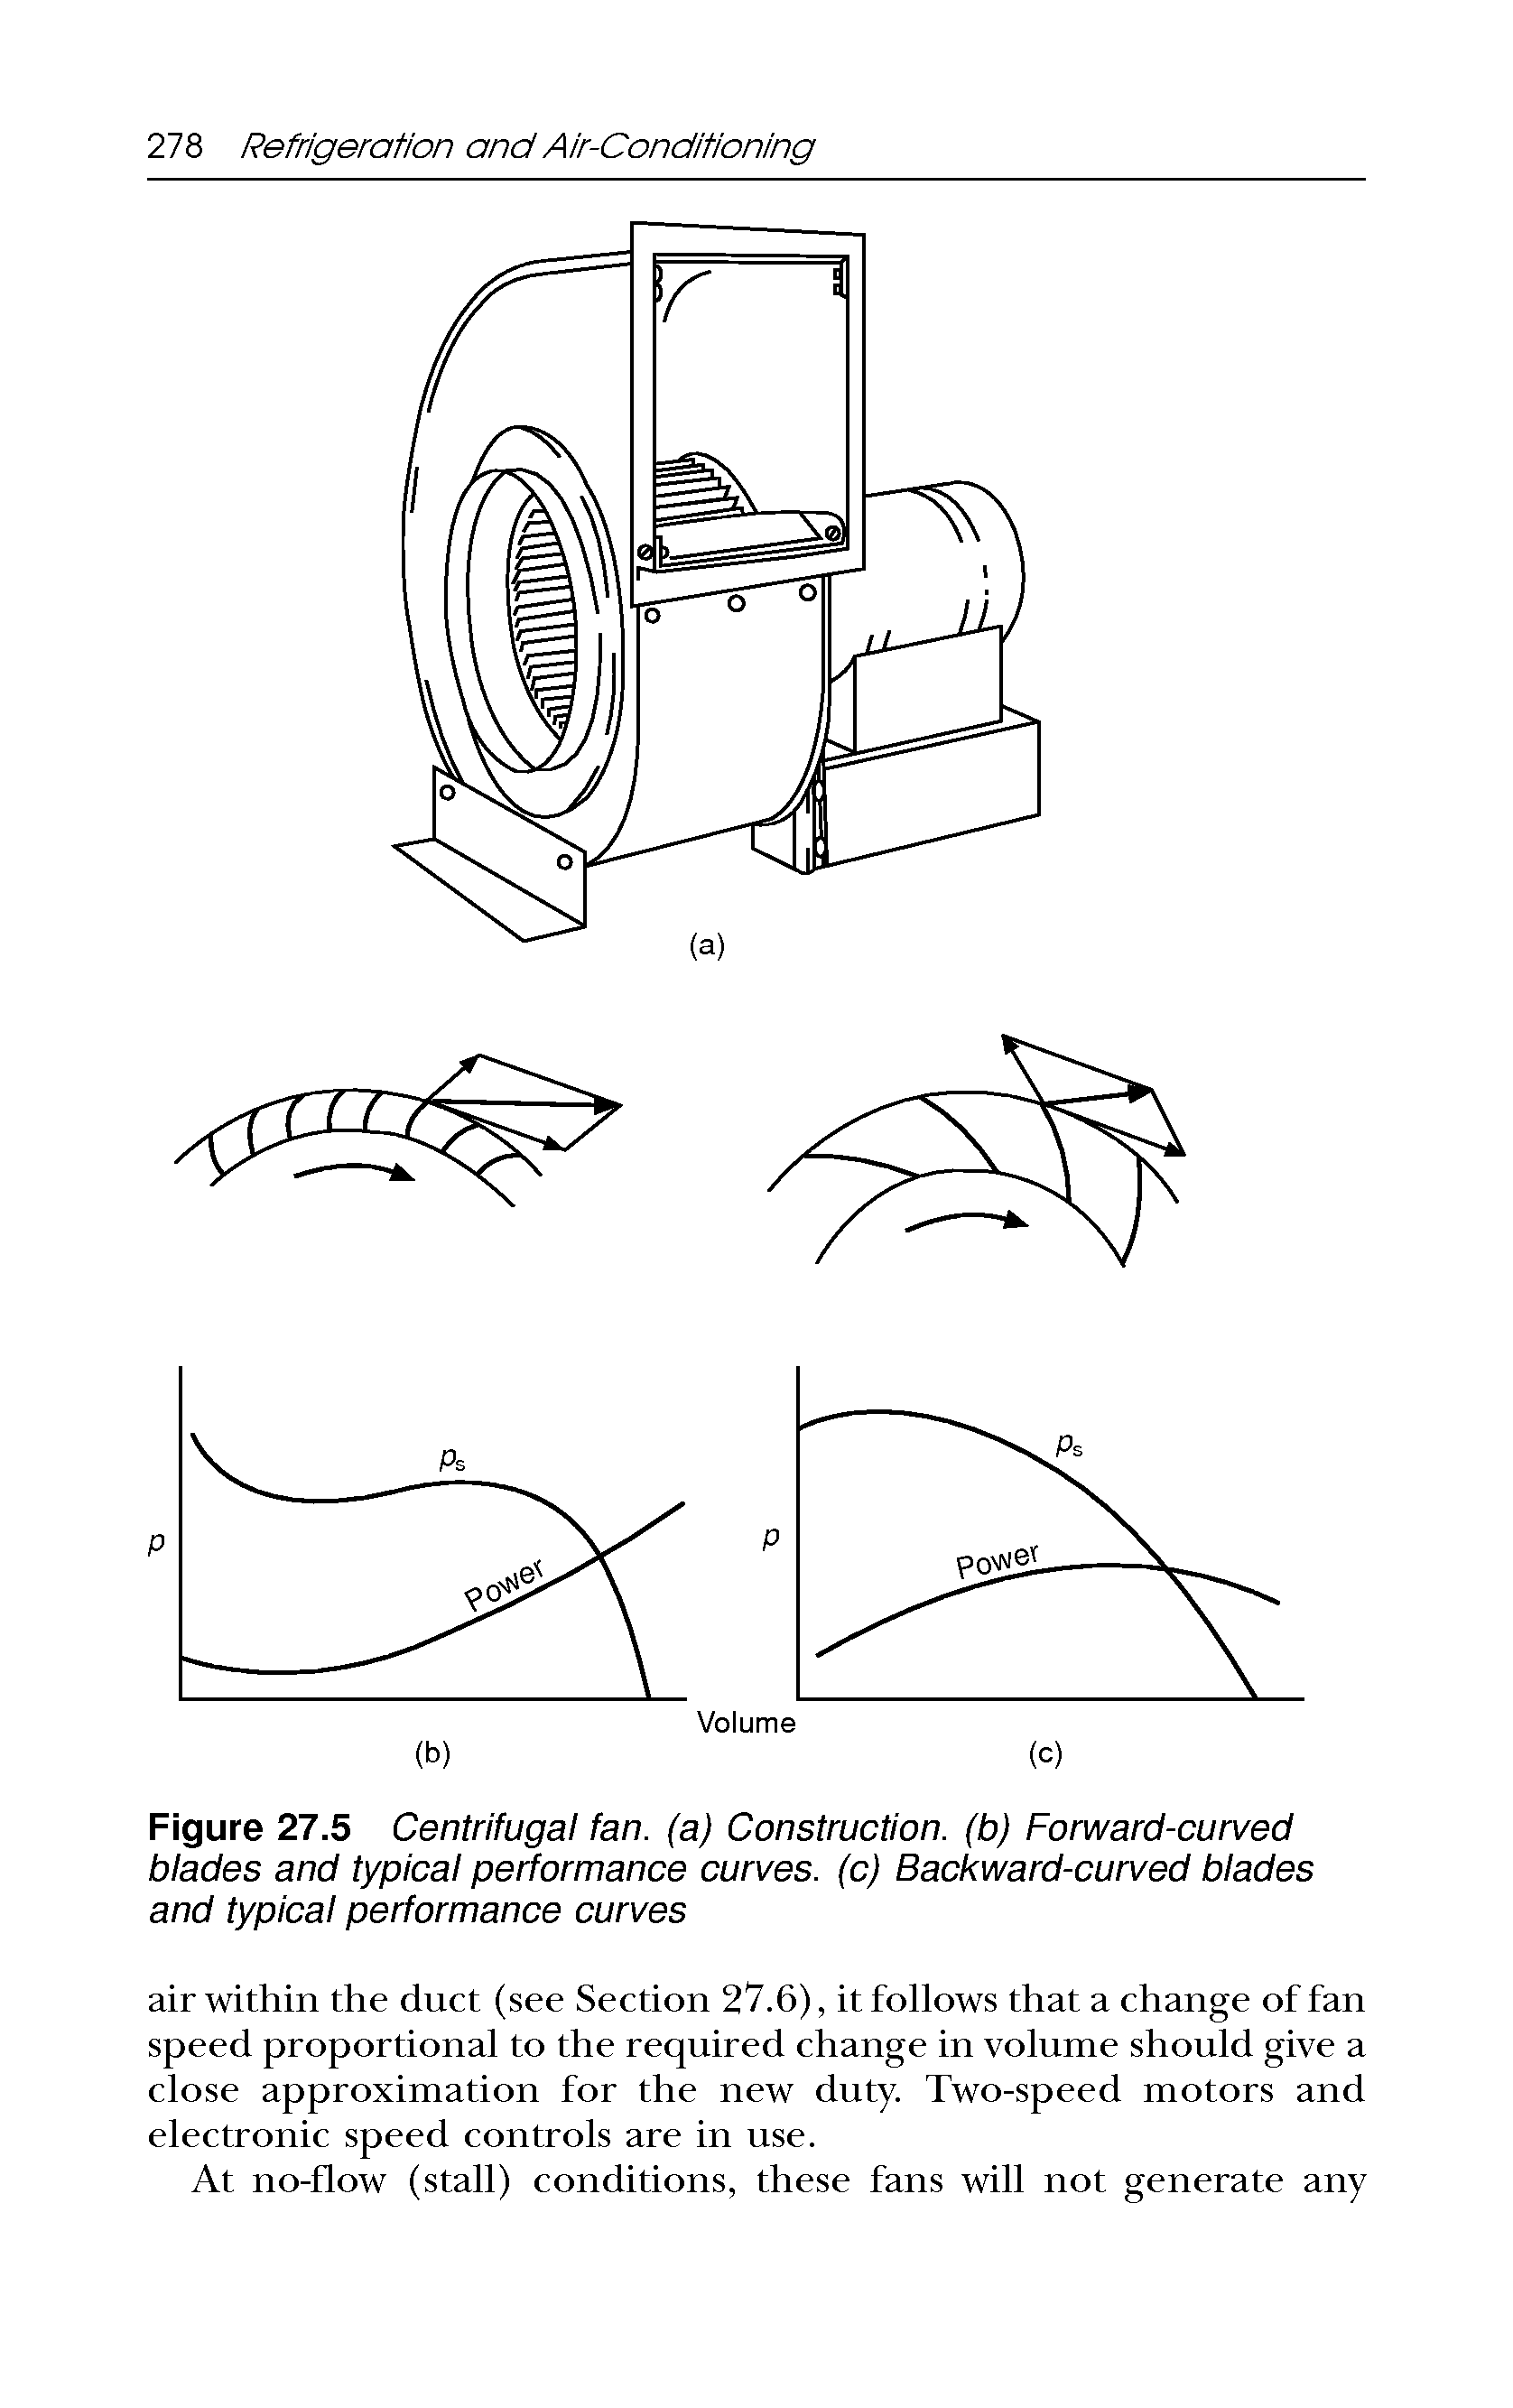 Figure 27.5 Centrifugal fan. (a) Construction, (b) Forward-curved blades and typical performance curves, (c) Backward-curved blades and typical performance curves...